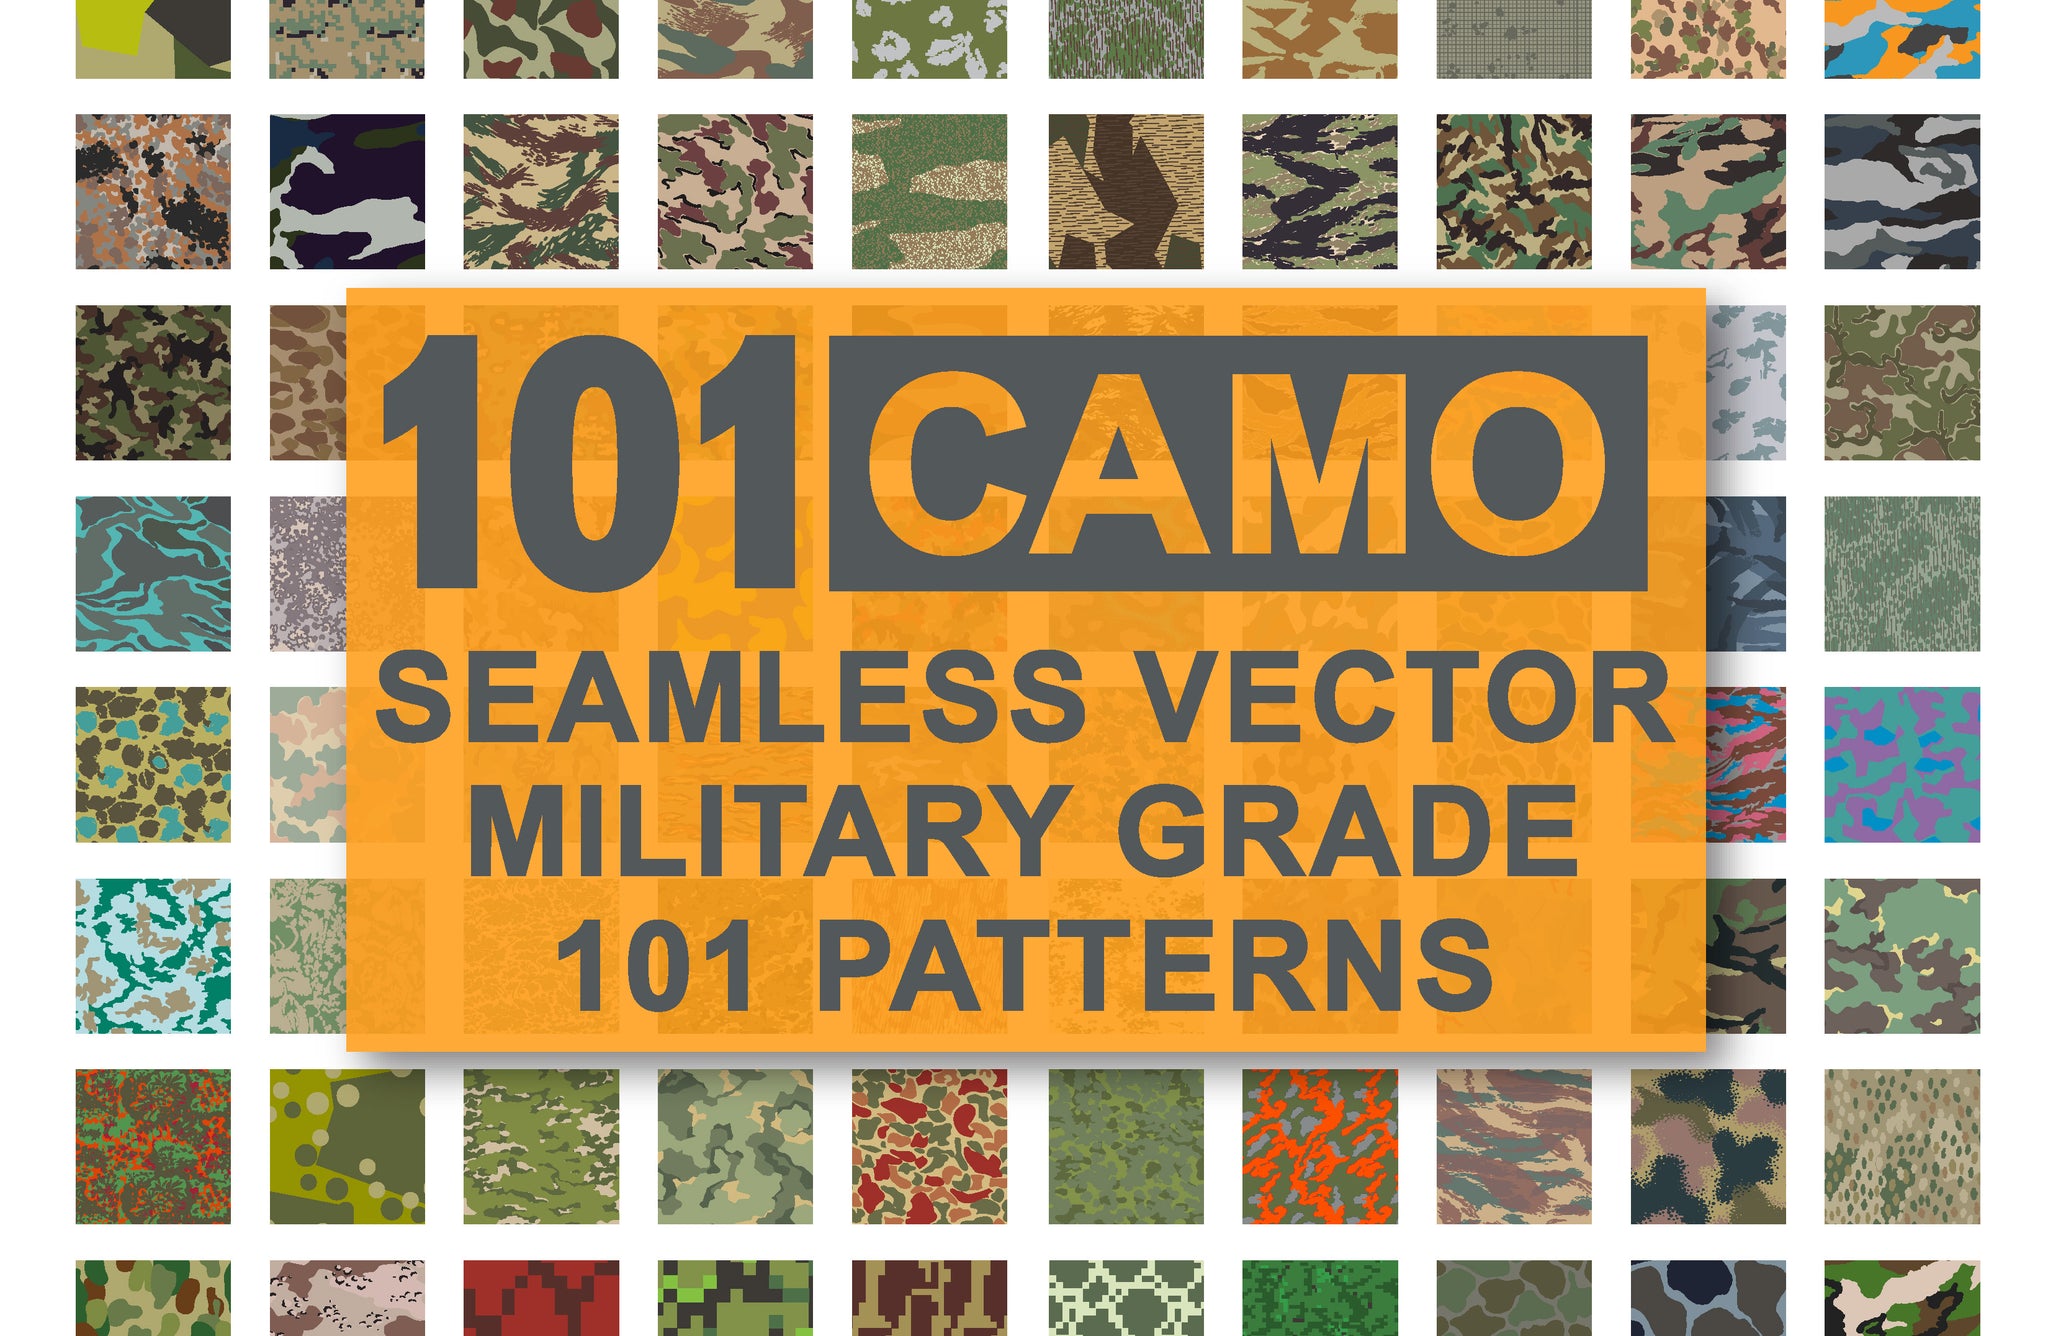 For work  Camo patterns, Camouflage patterns, Camouflage pattern design